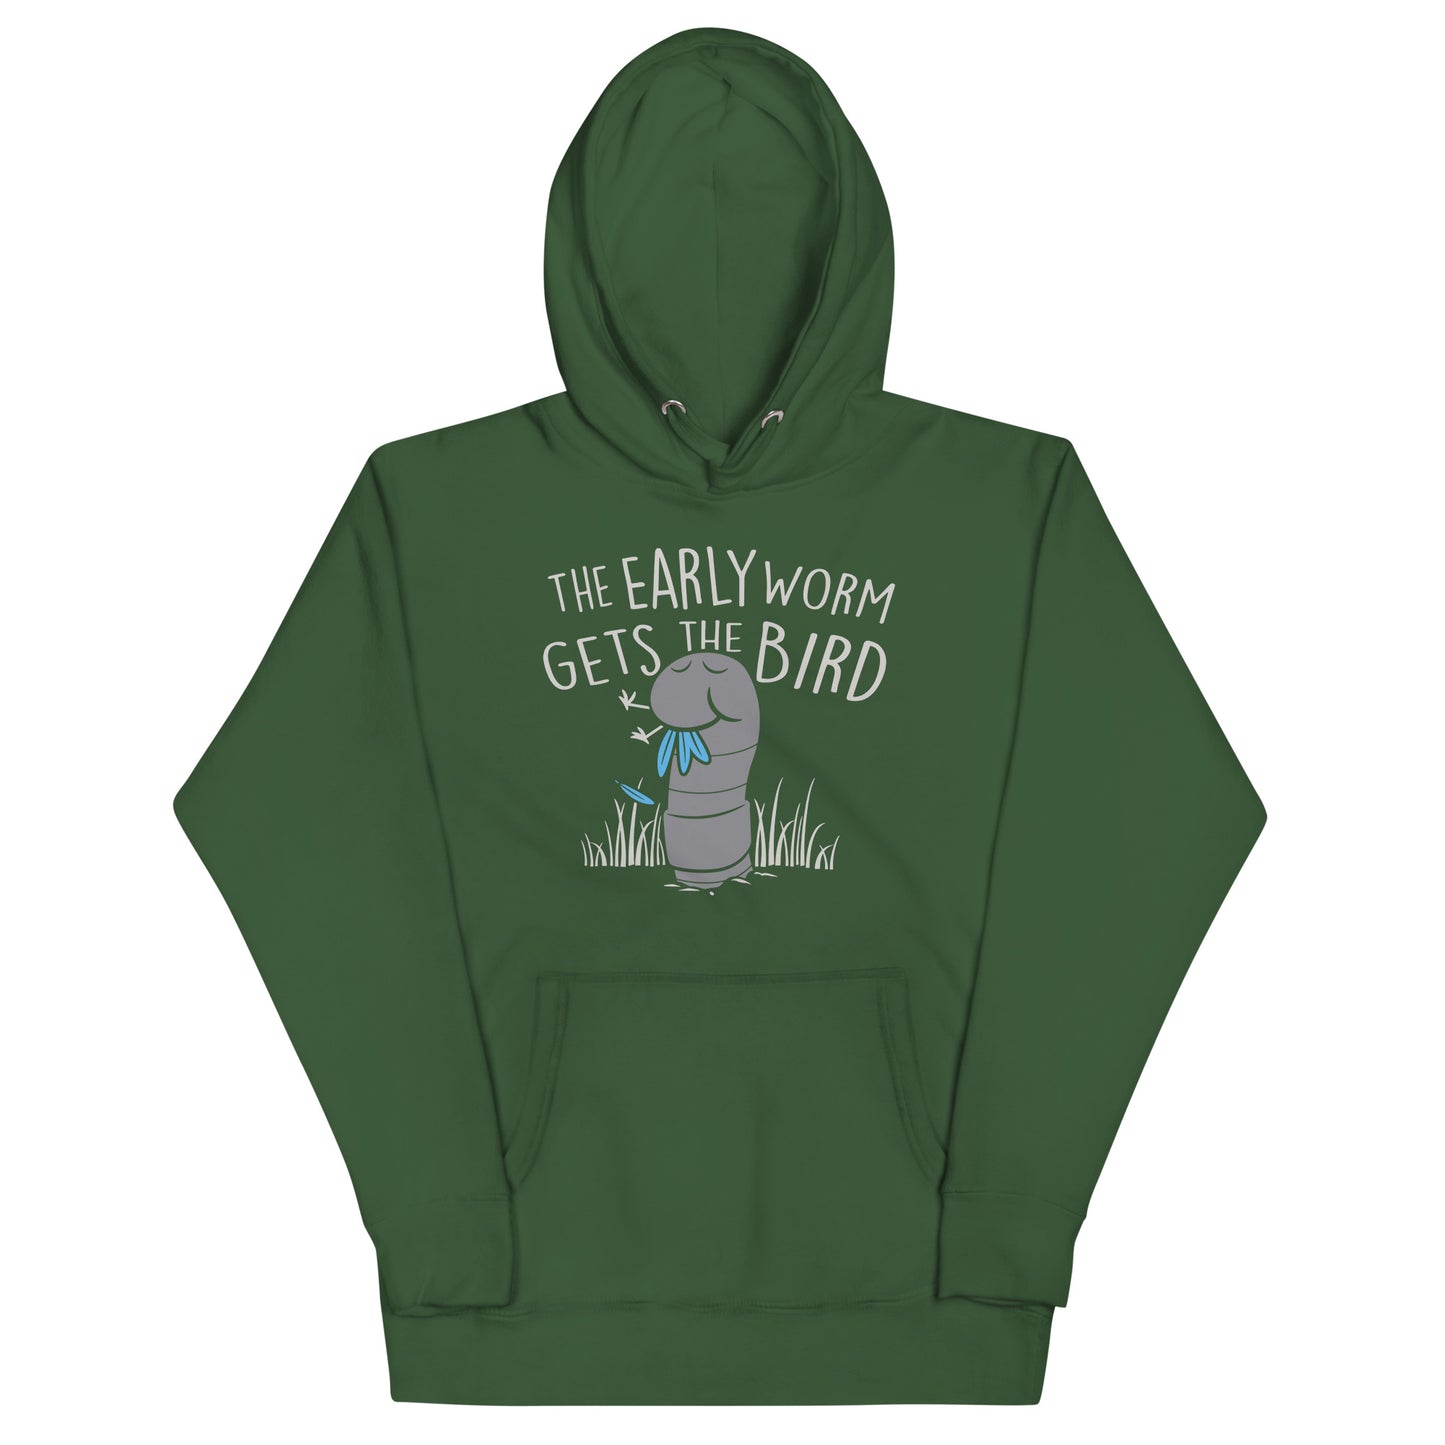 The Early Worm Gets The Bird Unisex Hoodie